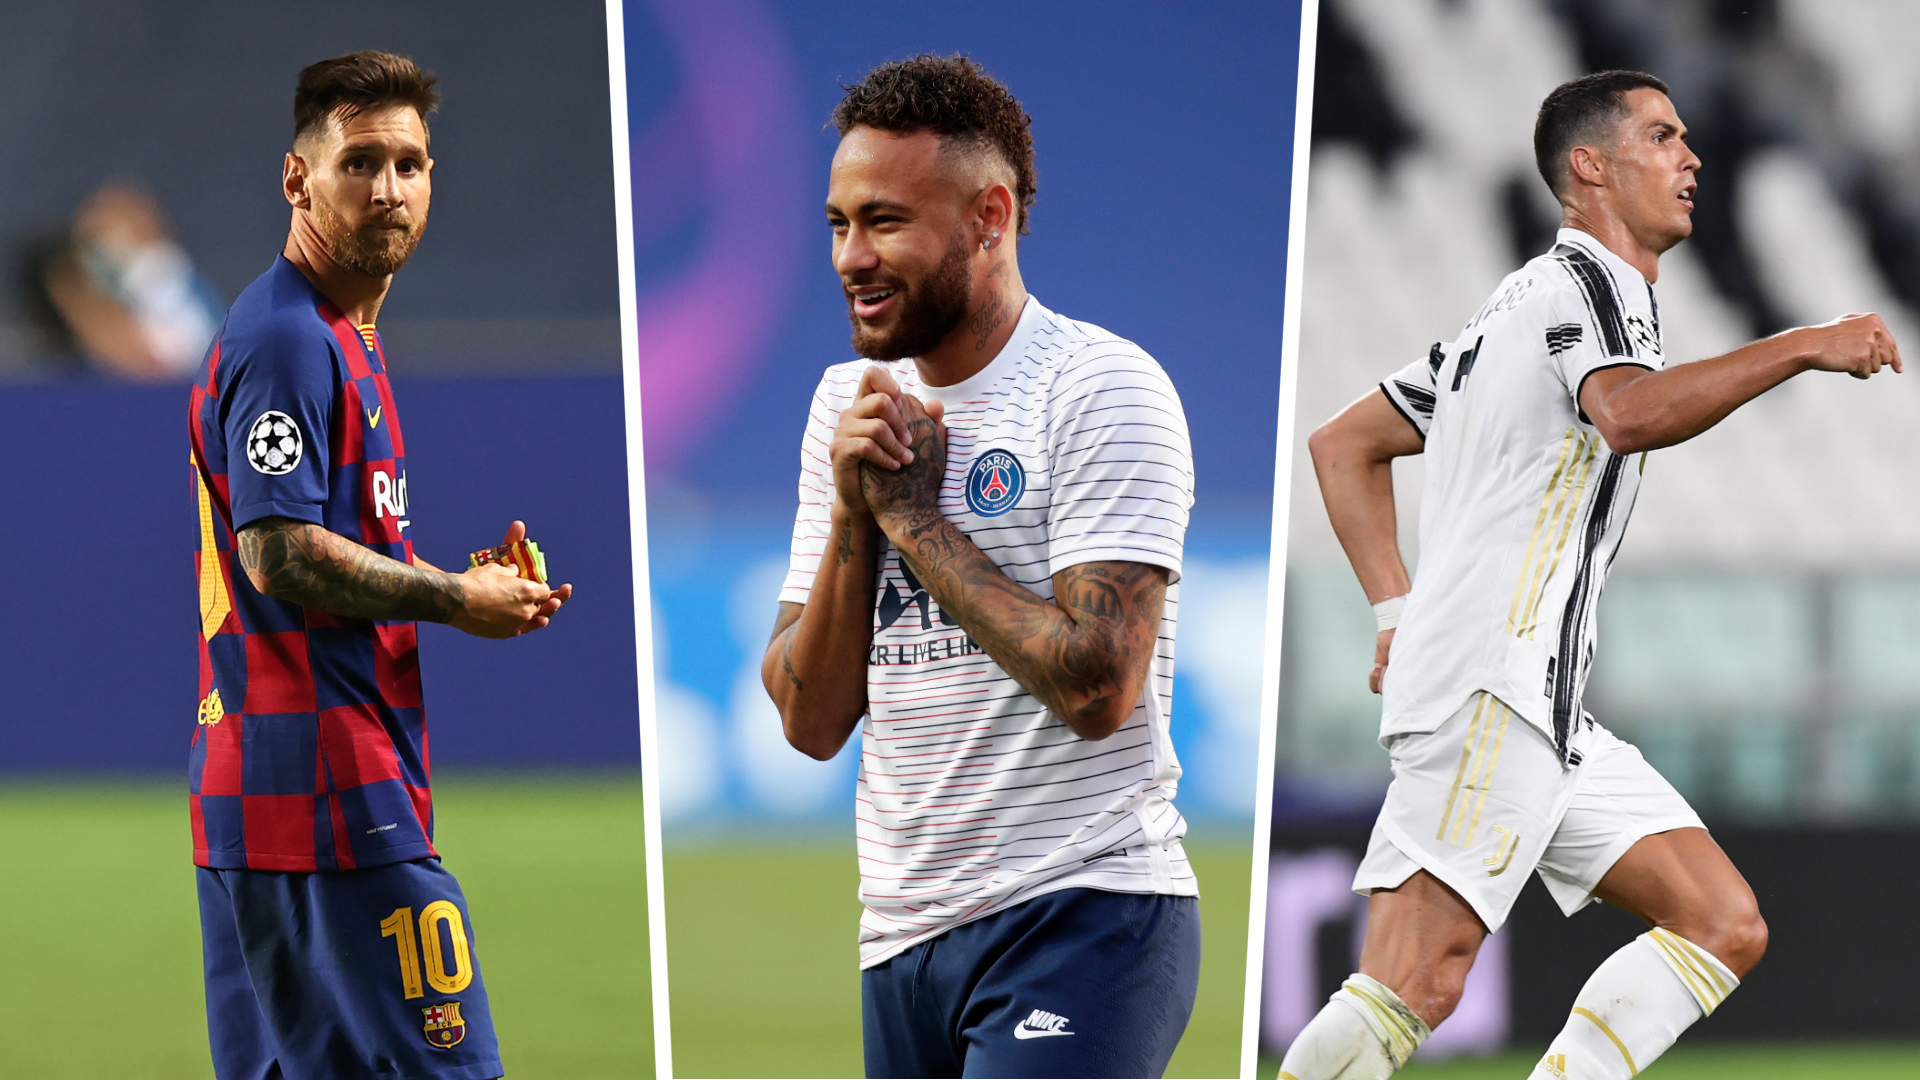 Neymar aiming for Ballon d'Or, admits Messi and Ronaldo are 'not from this planet'